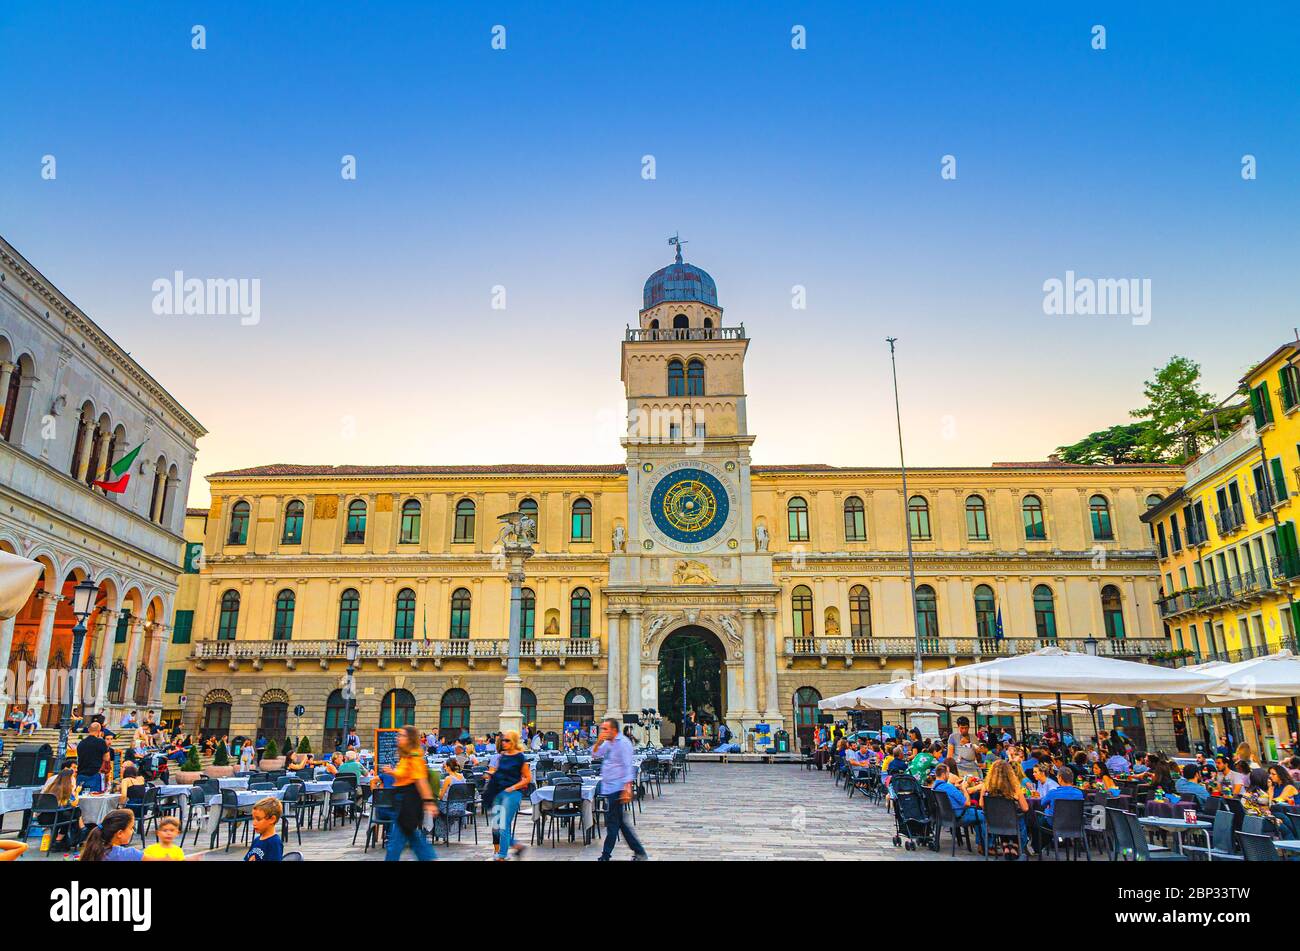 Padua, Italy, September 12, 2019: Torre dell'Orologio clock tower with astronomical clock and restaurant tables in the Piazza Plaza Dei Signori square, twilight evening view, Veneto Region Stock Photo